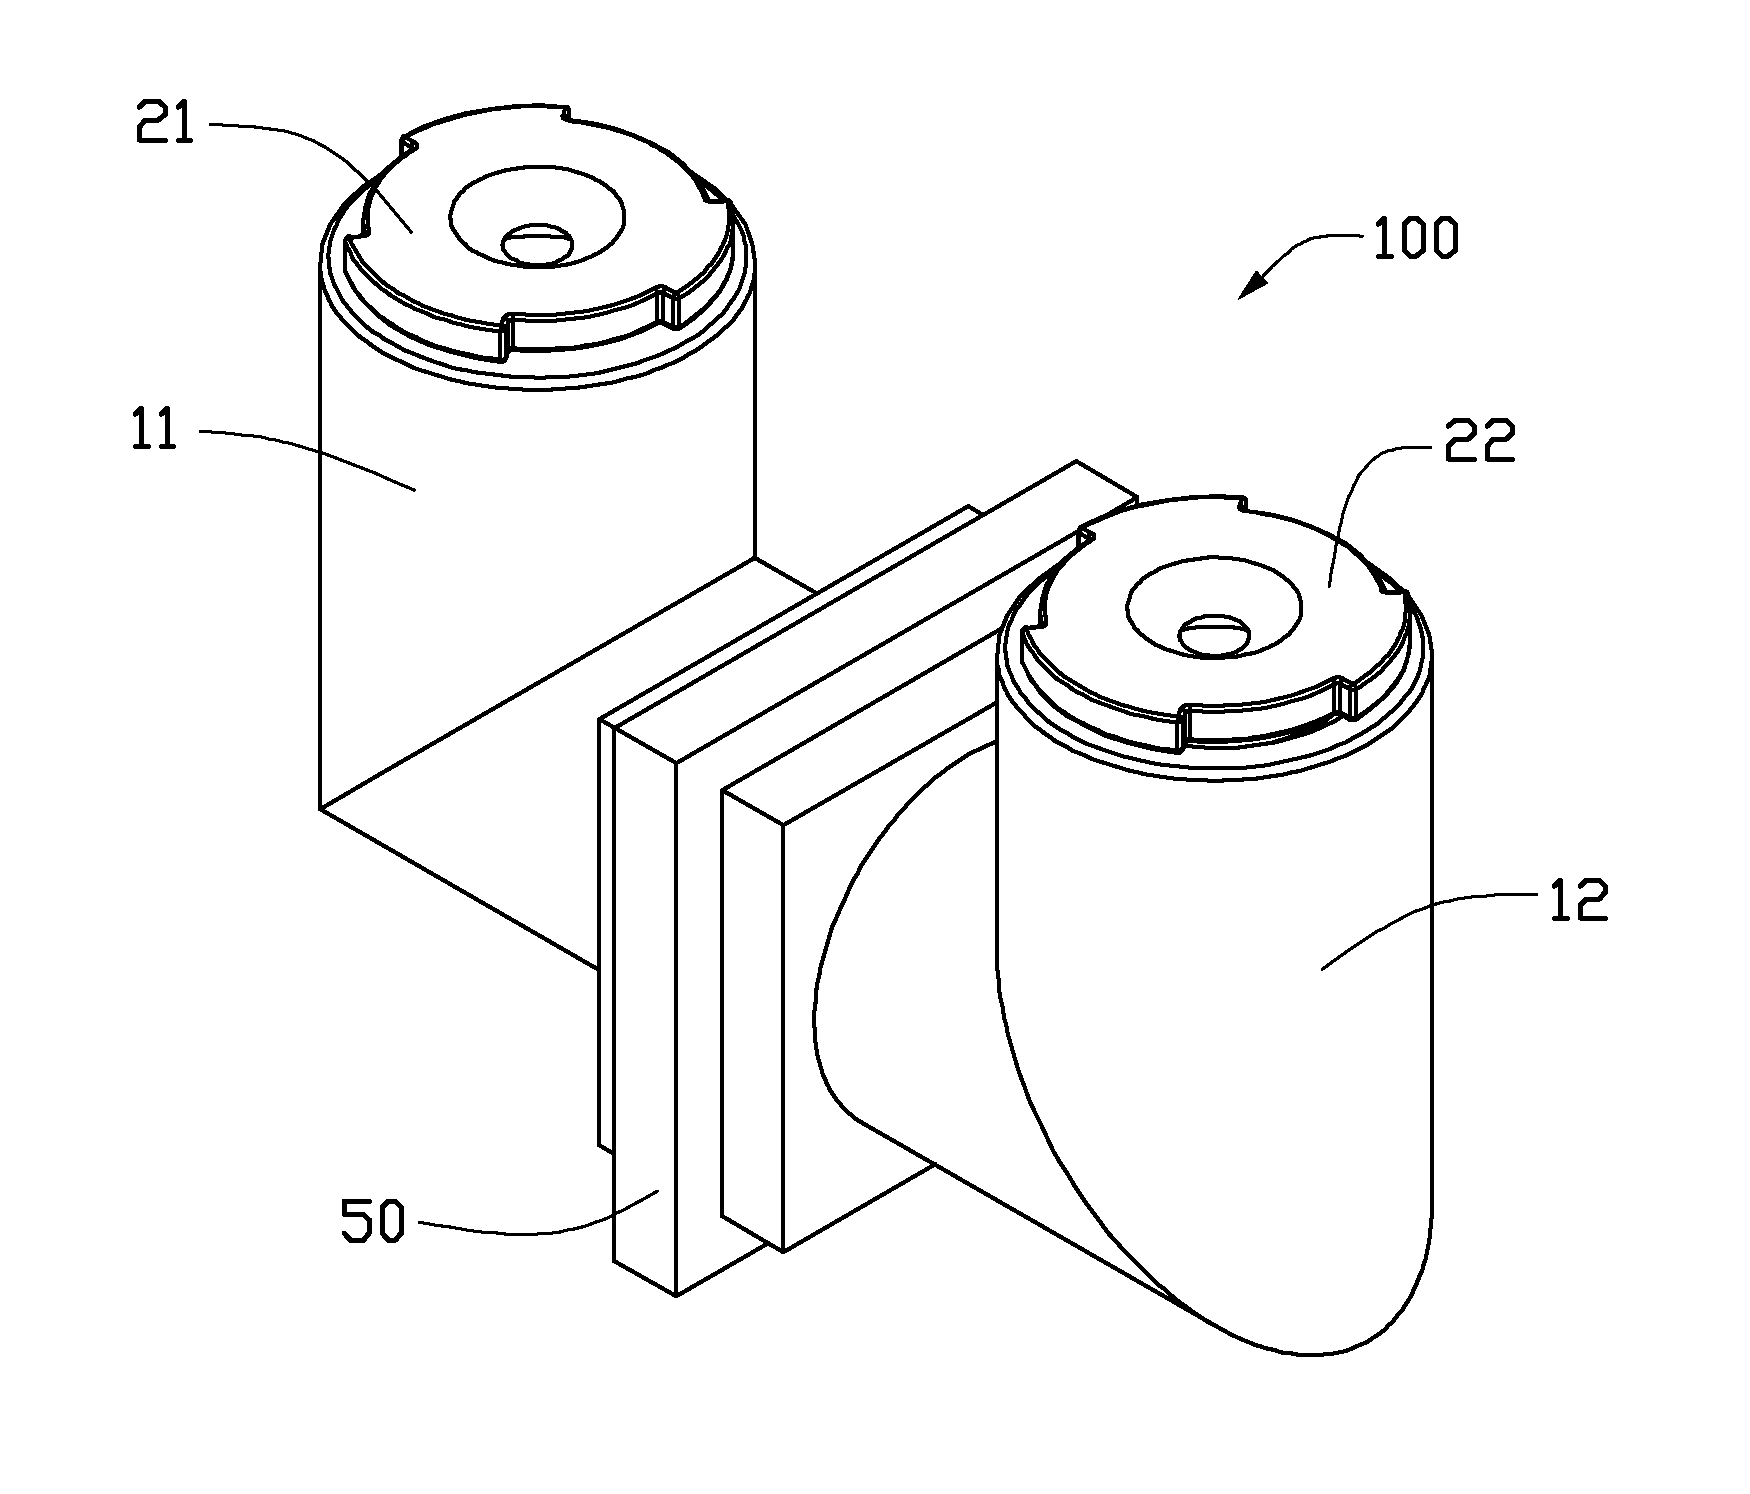 Camera module with dual lens modules and image sensors